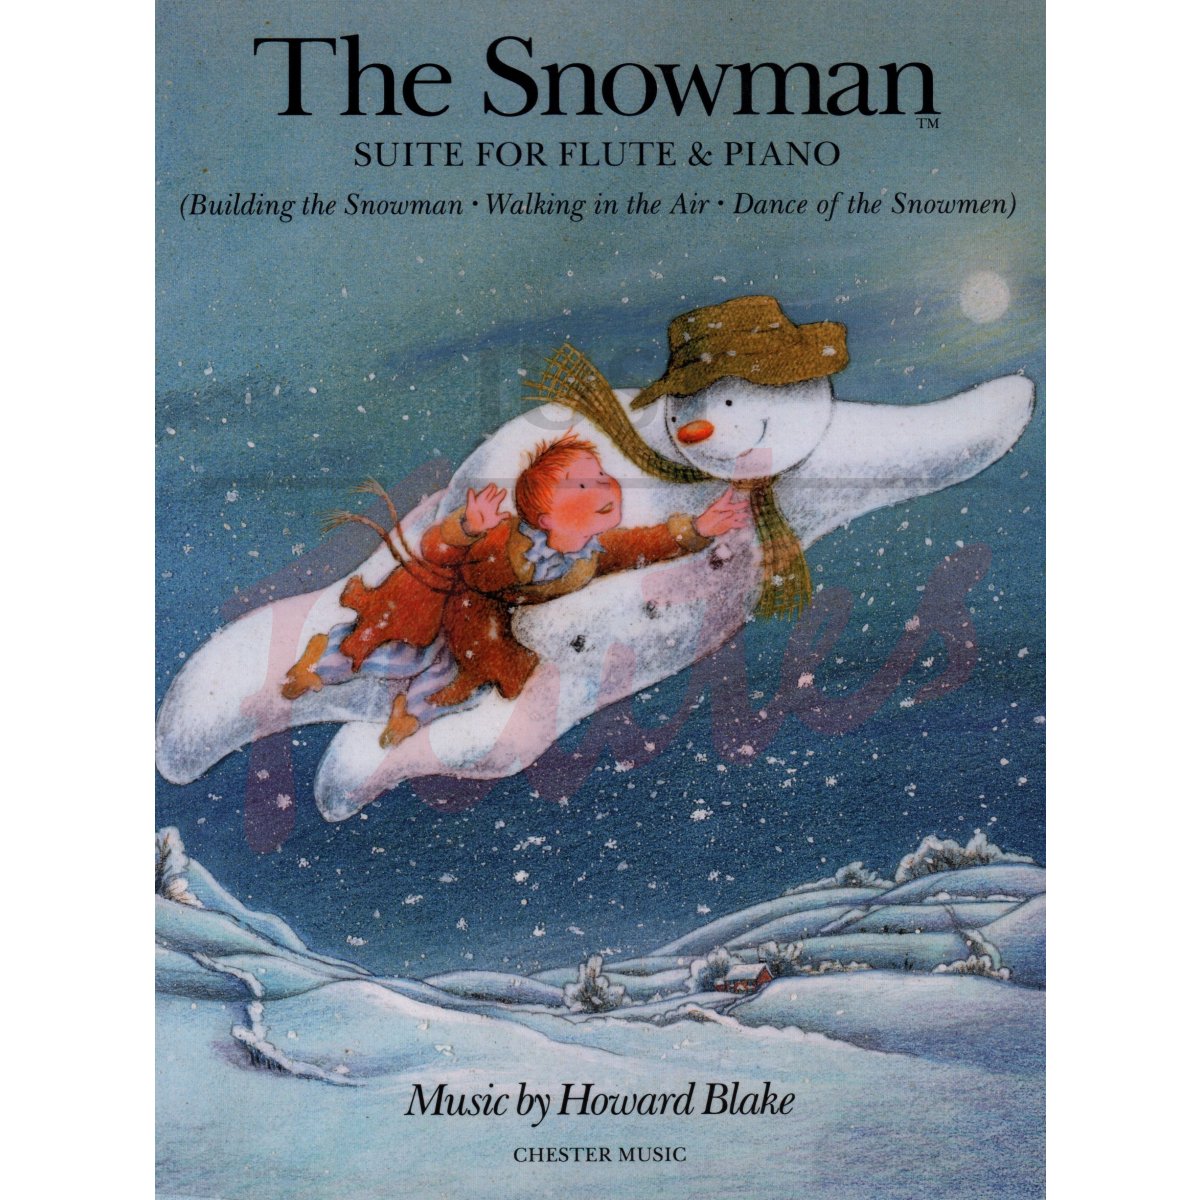 The Snowman Suite for Flute and Piano